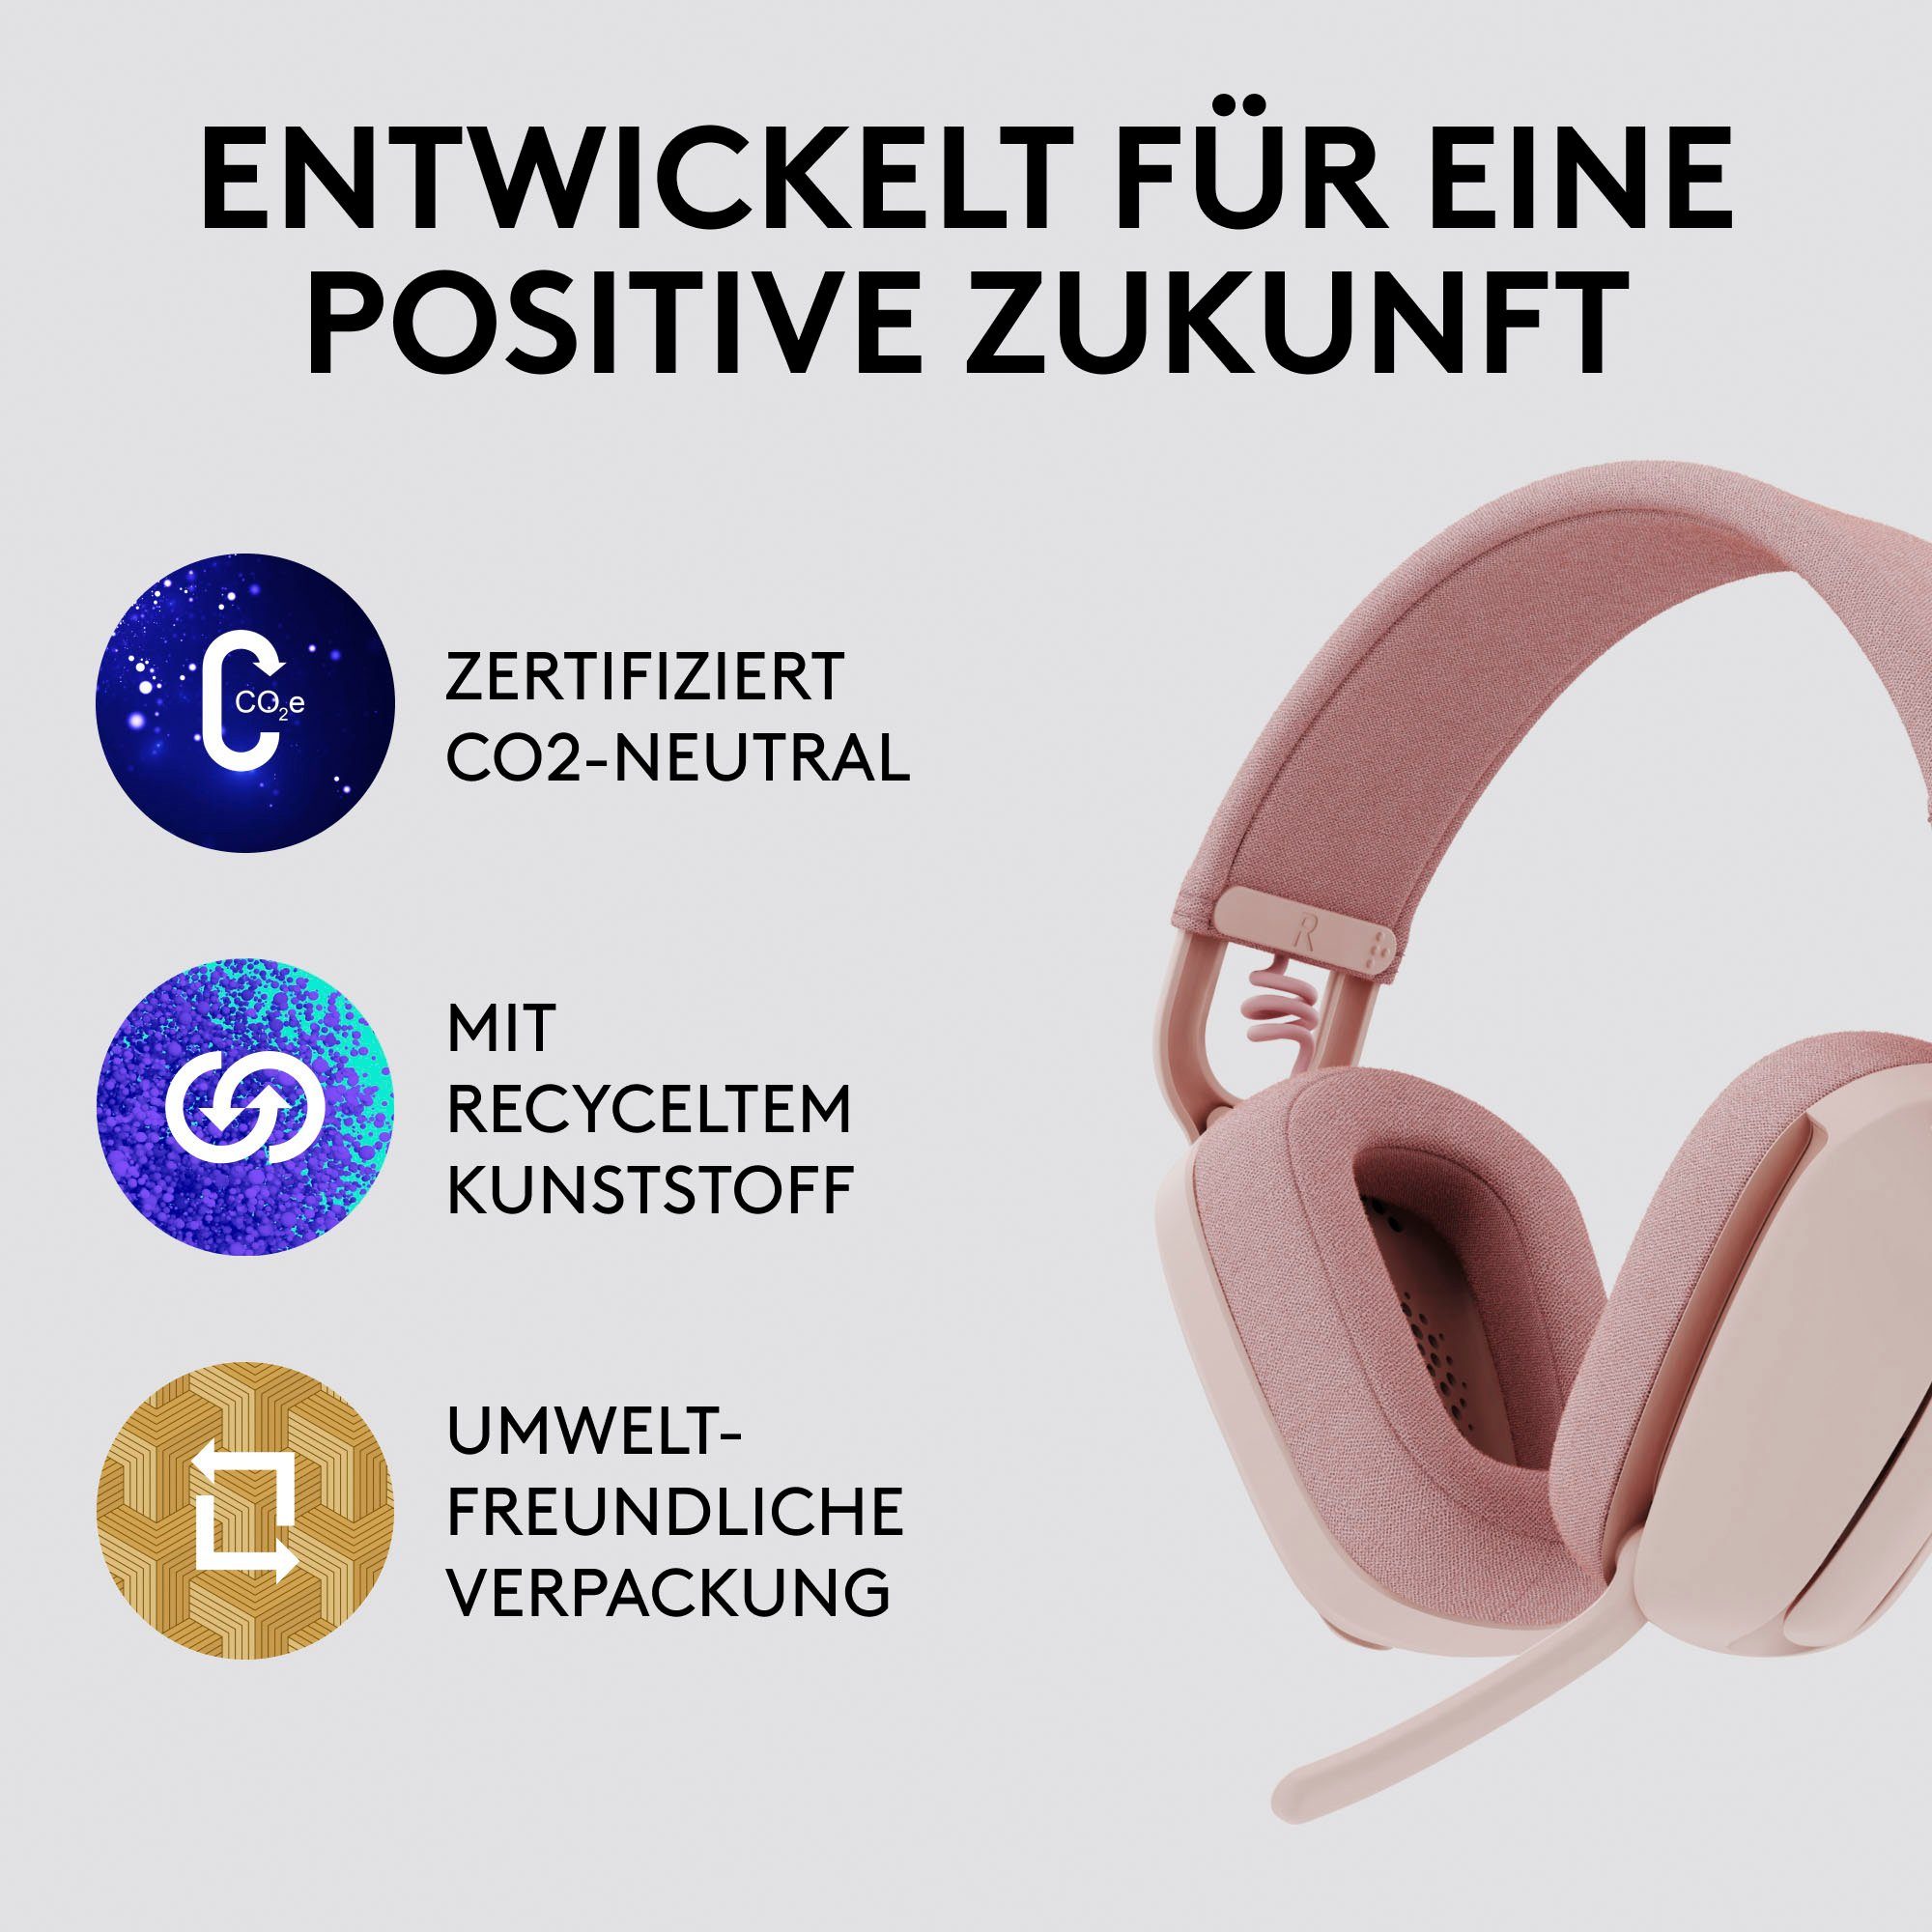 rose (Noise-Cancelling, Logitech Vibe Gaming-Headset 100 Zone Bluetooth)